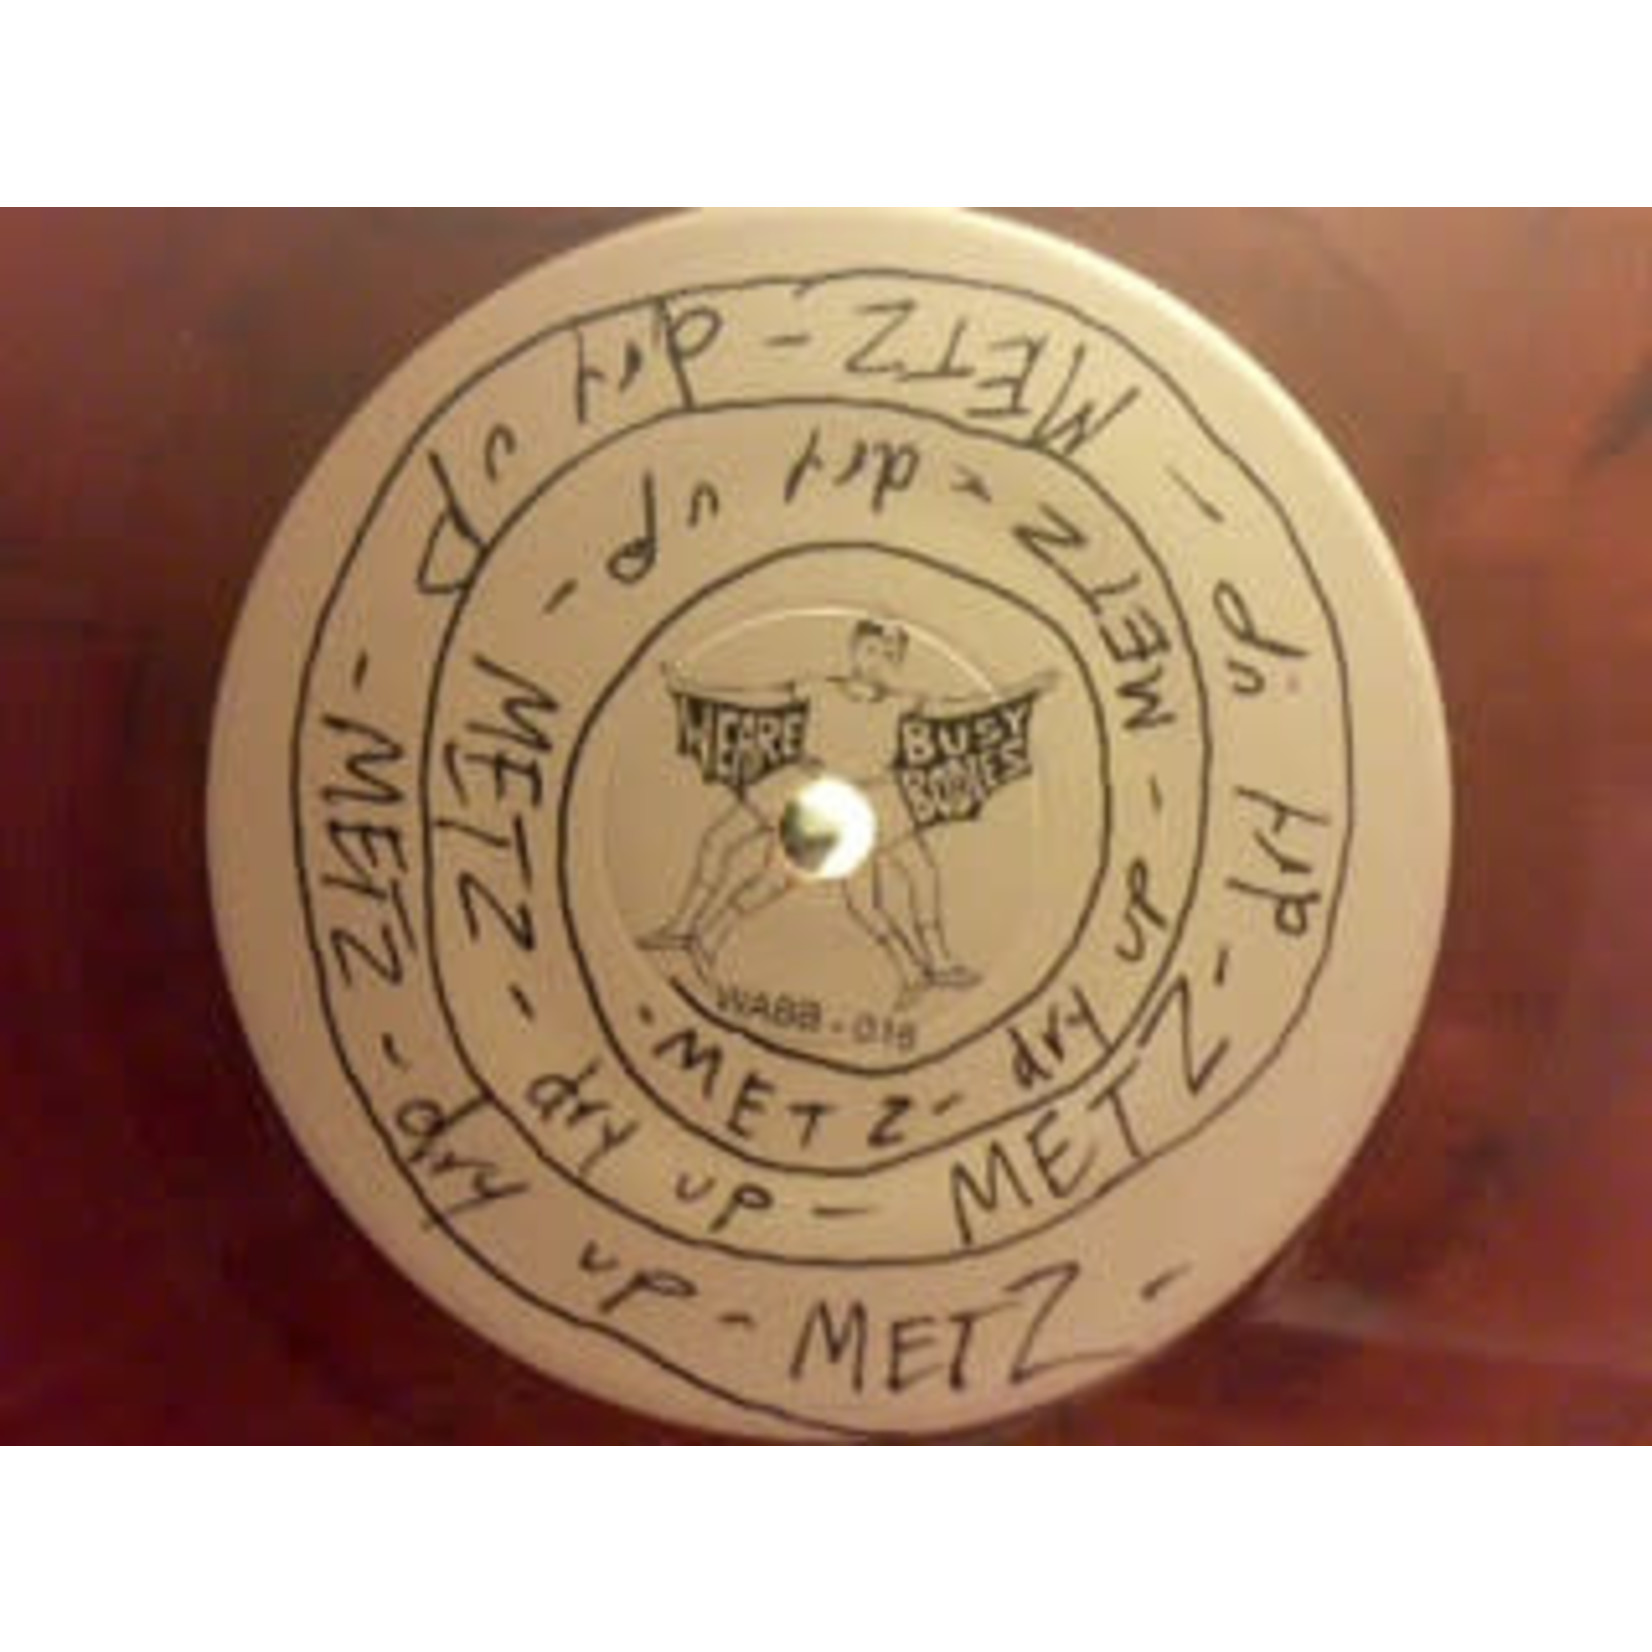 [7"] Metz - Ripped on the Fence b/w Dry Up (7", brown wax)